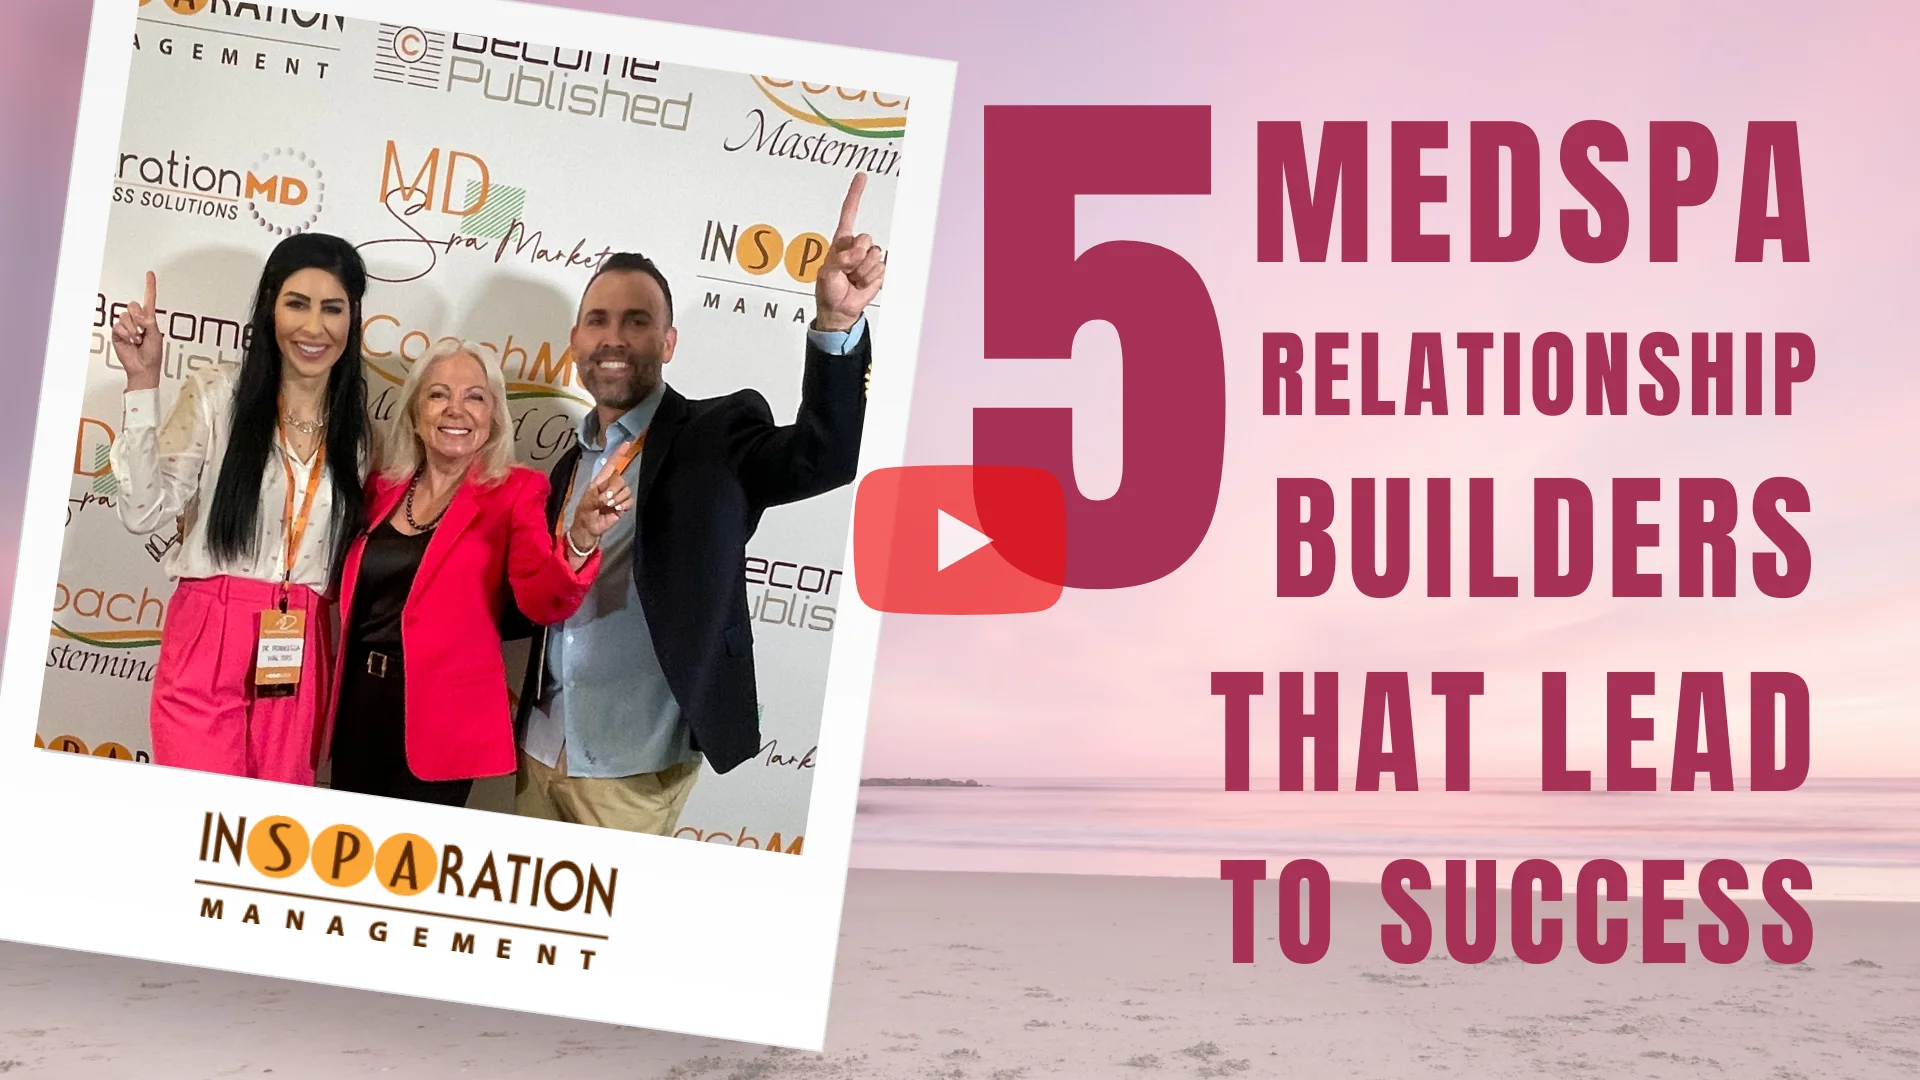 Discover 5 Meaningful Relationship Builders that Lead to Success